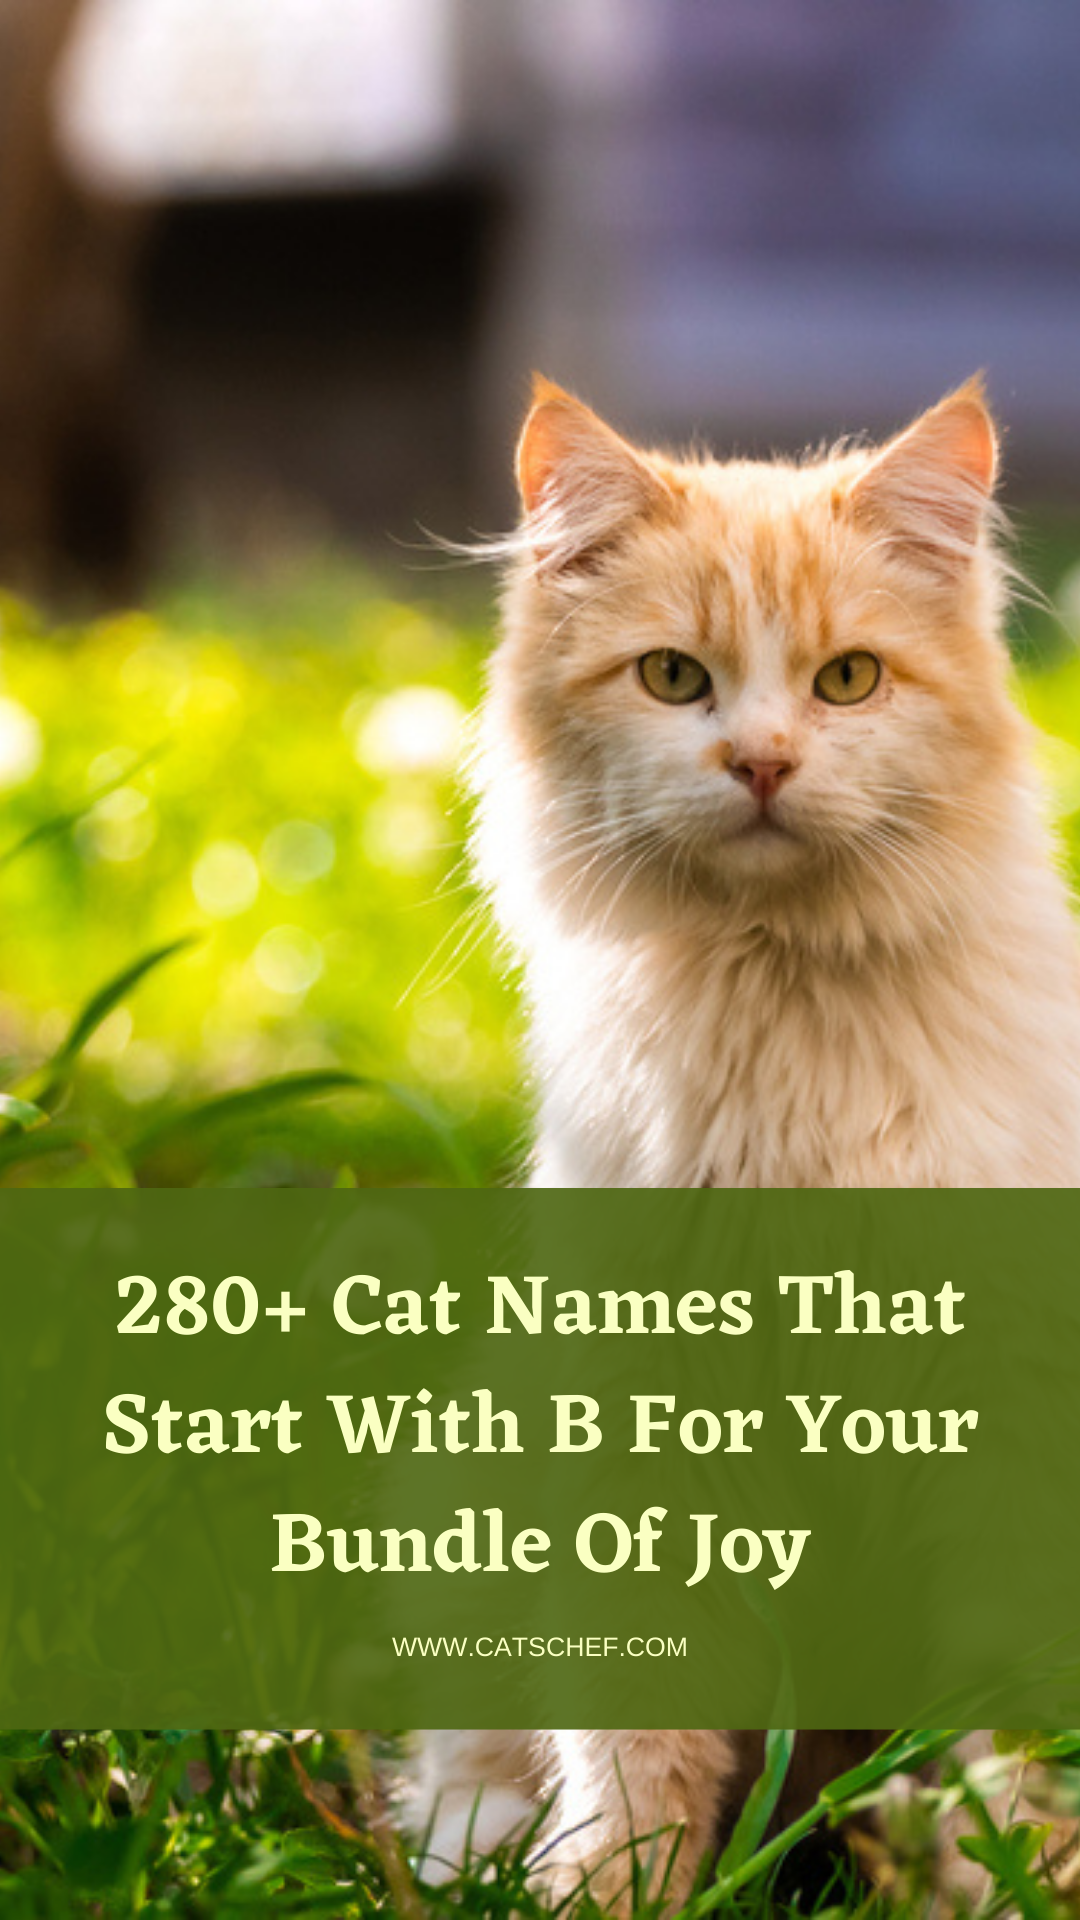 280+ Cat Names That Start With B For Your Bundle Of Joy